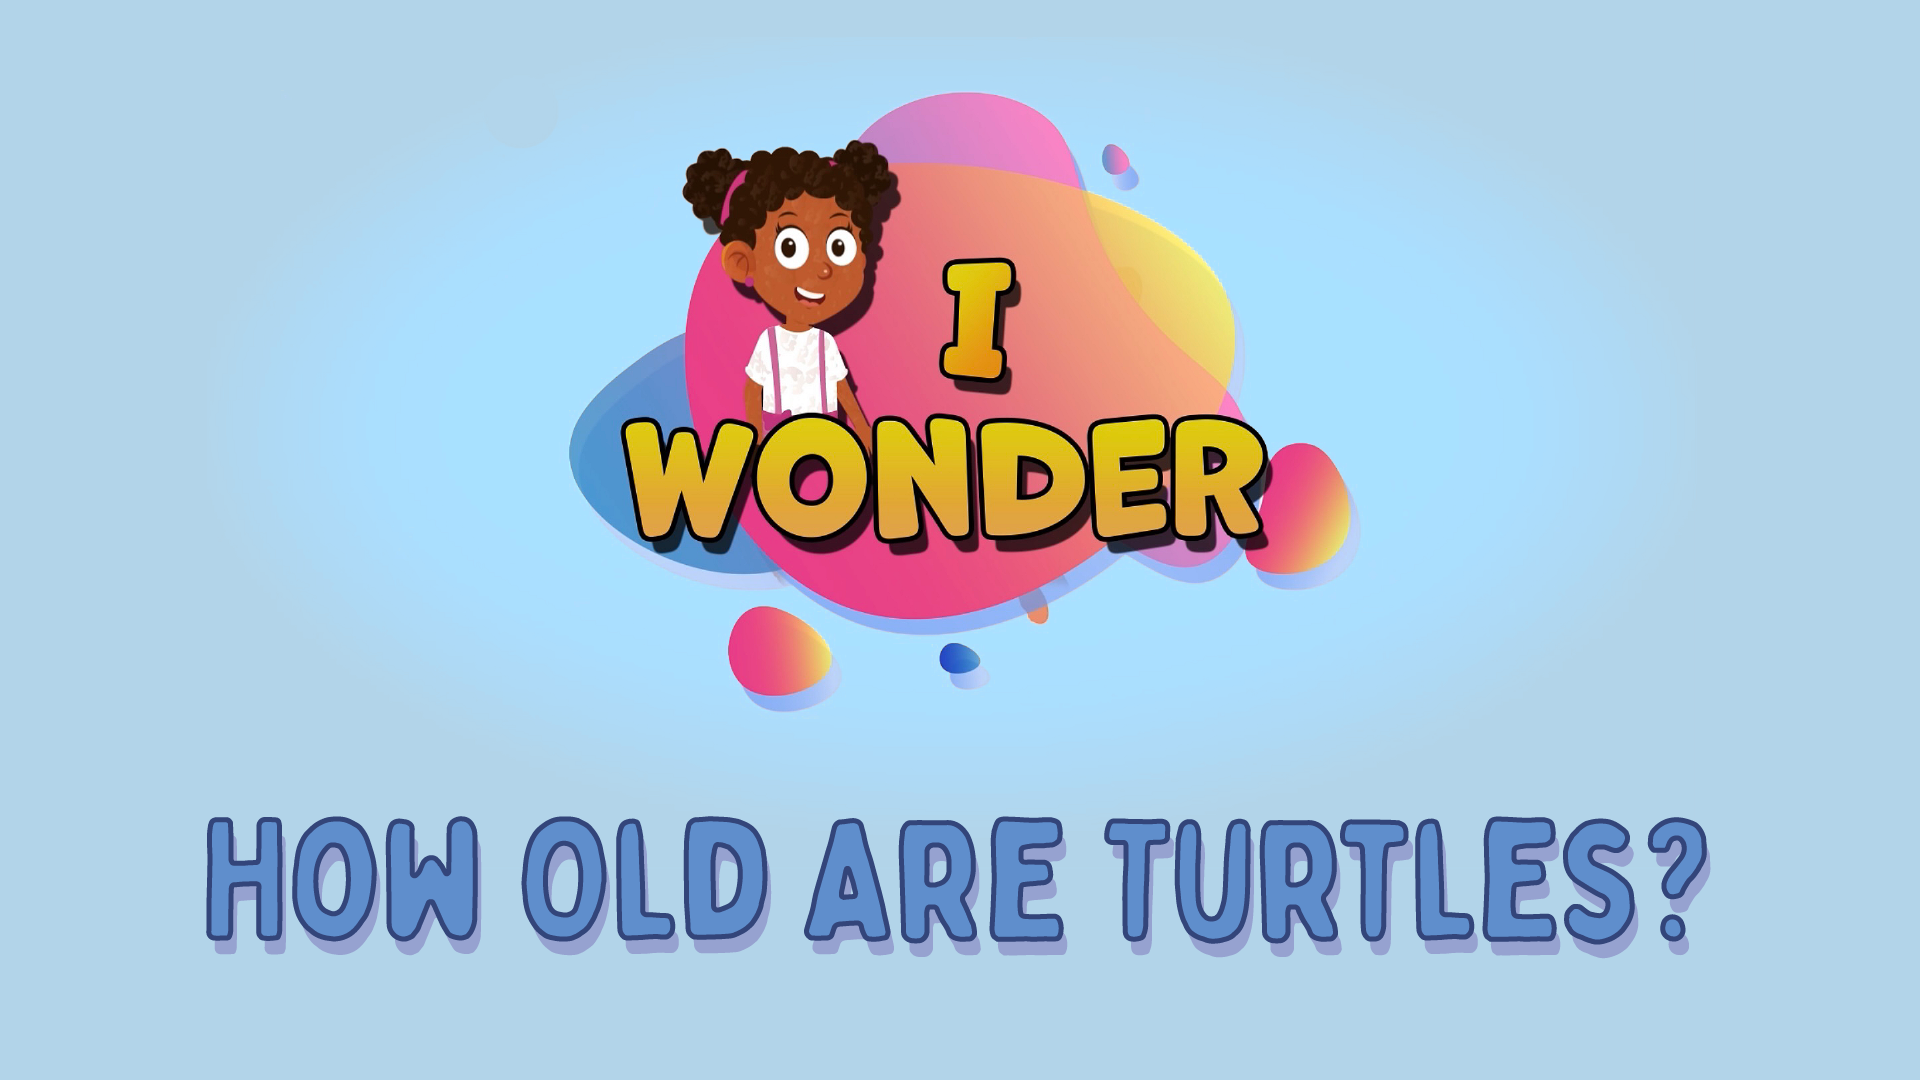 How Old Are Turtles?